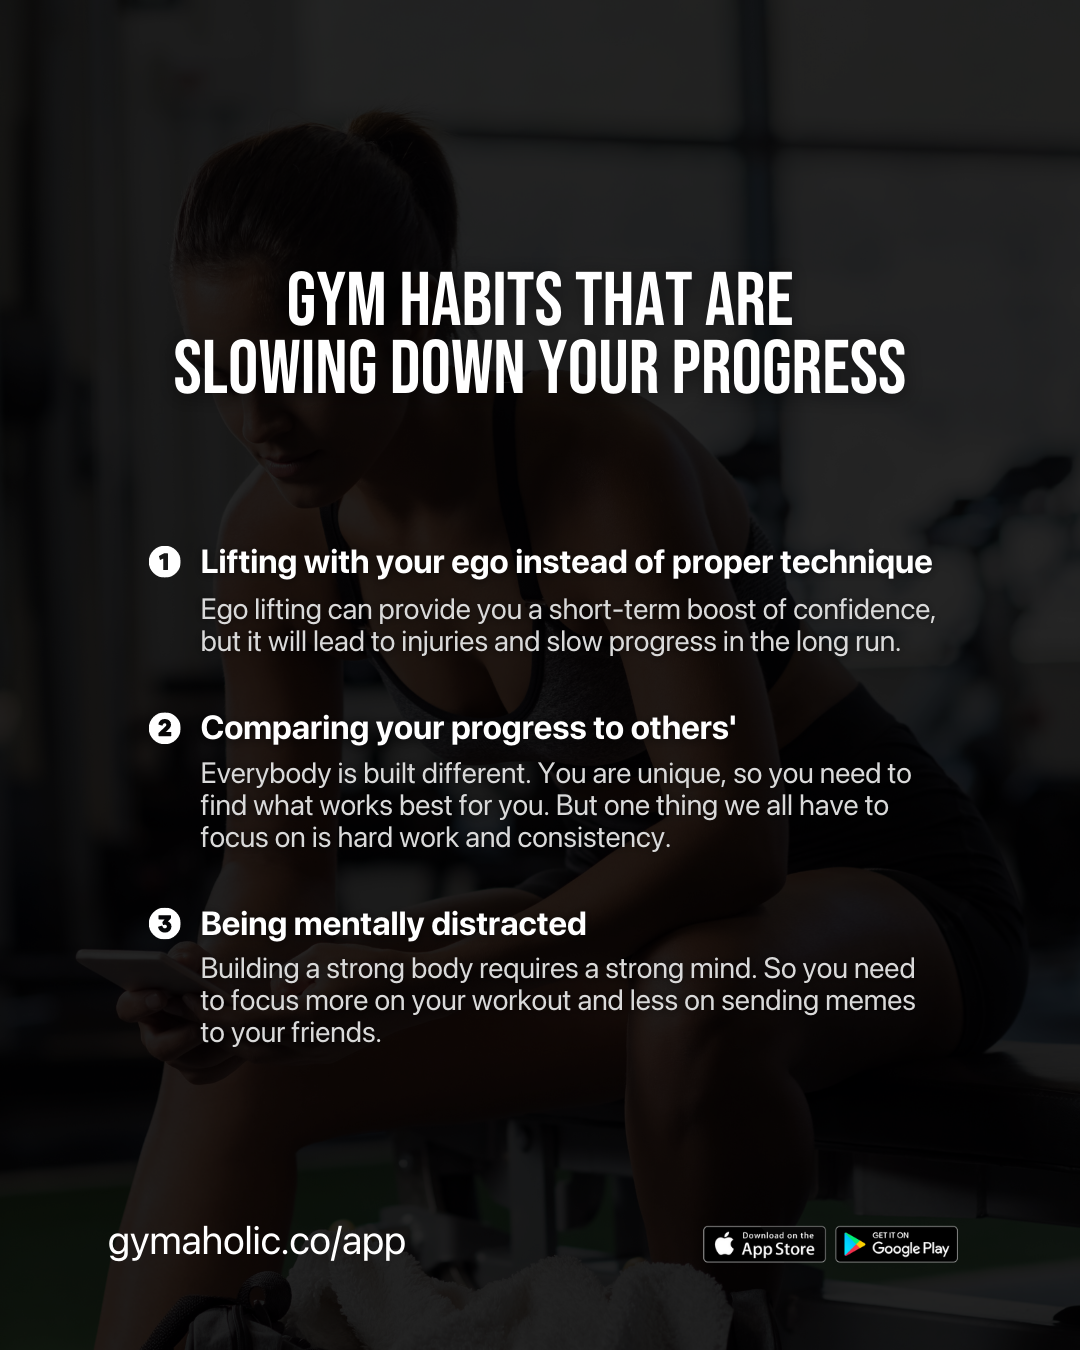 Gym Habits That Are Slowing Down Your Progress